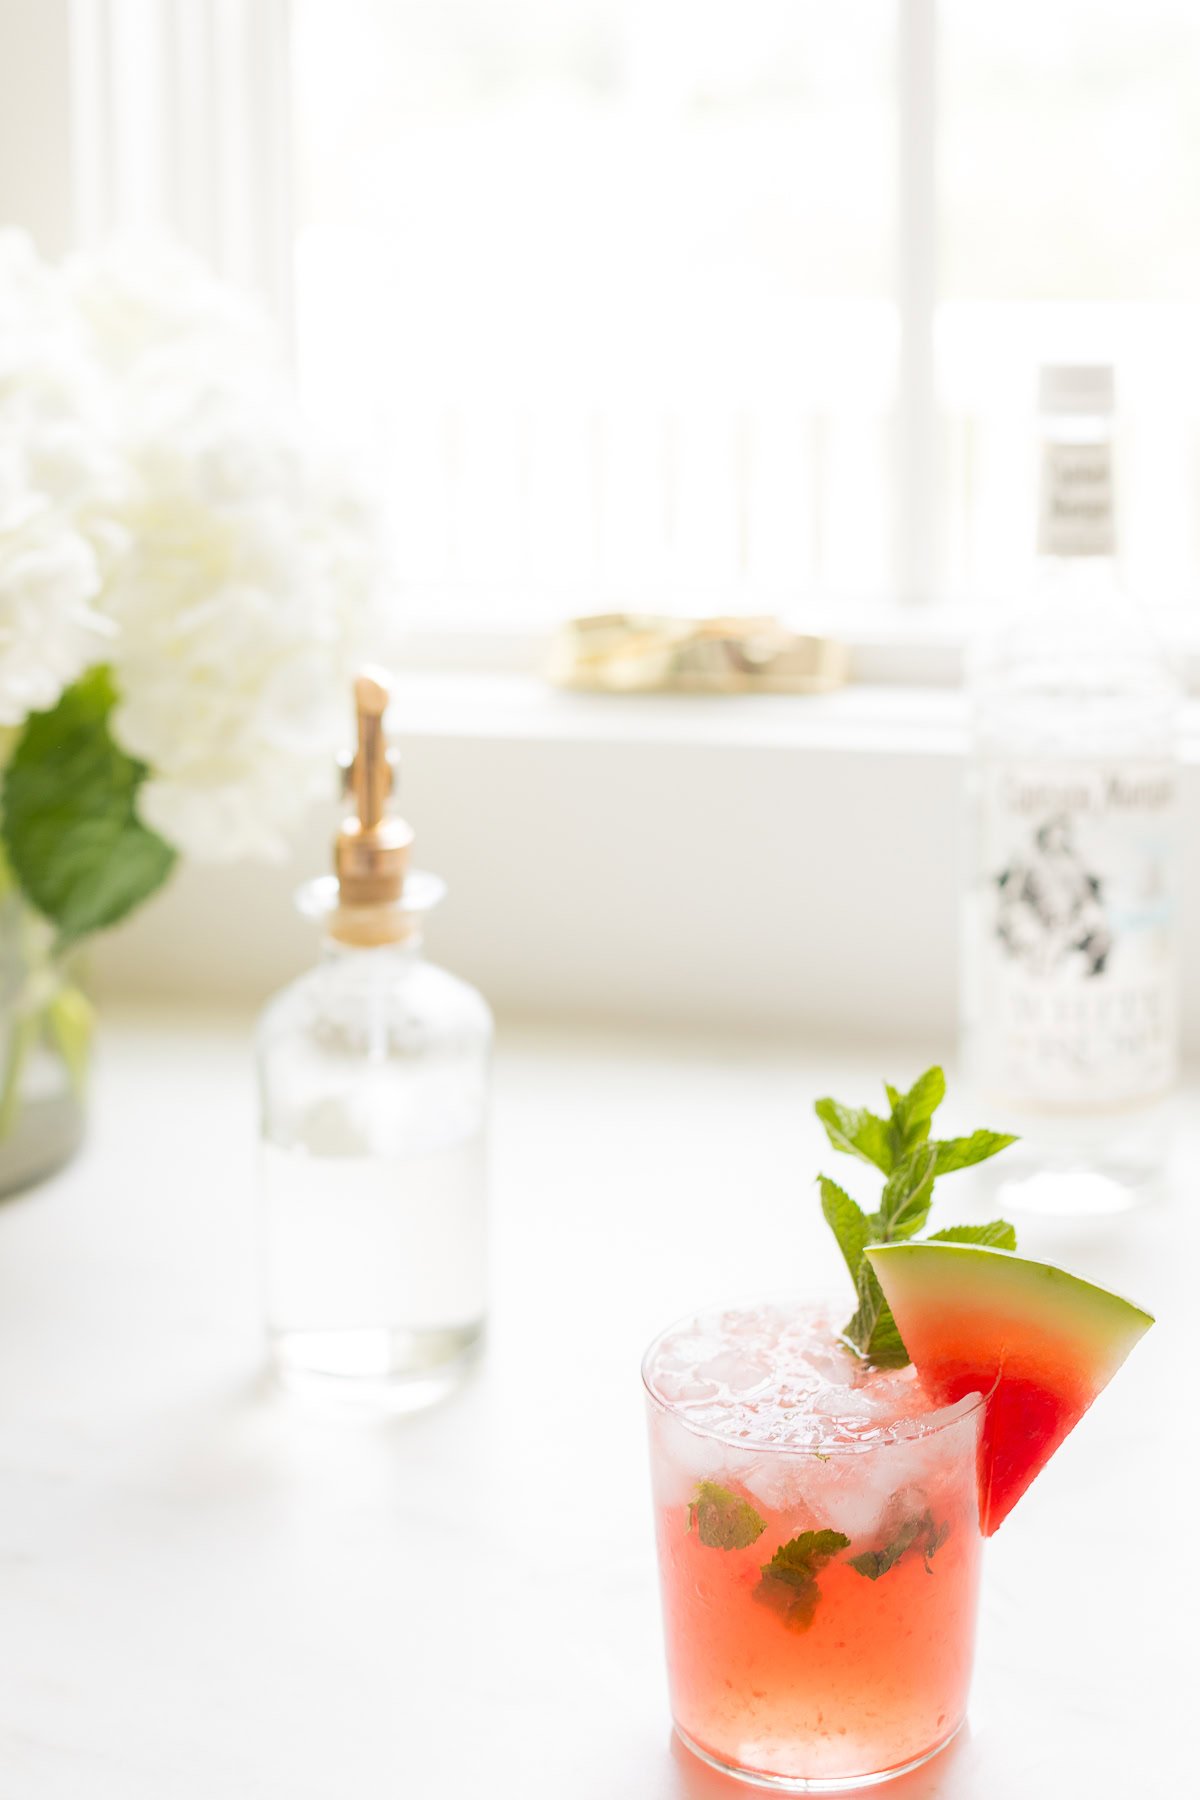 A refreshing watermelon mojito garnished with a slice of watermelon and fresh mint leaves in a clear glass.